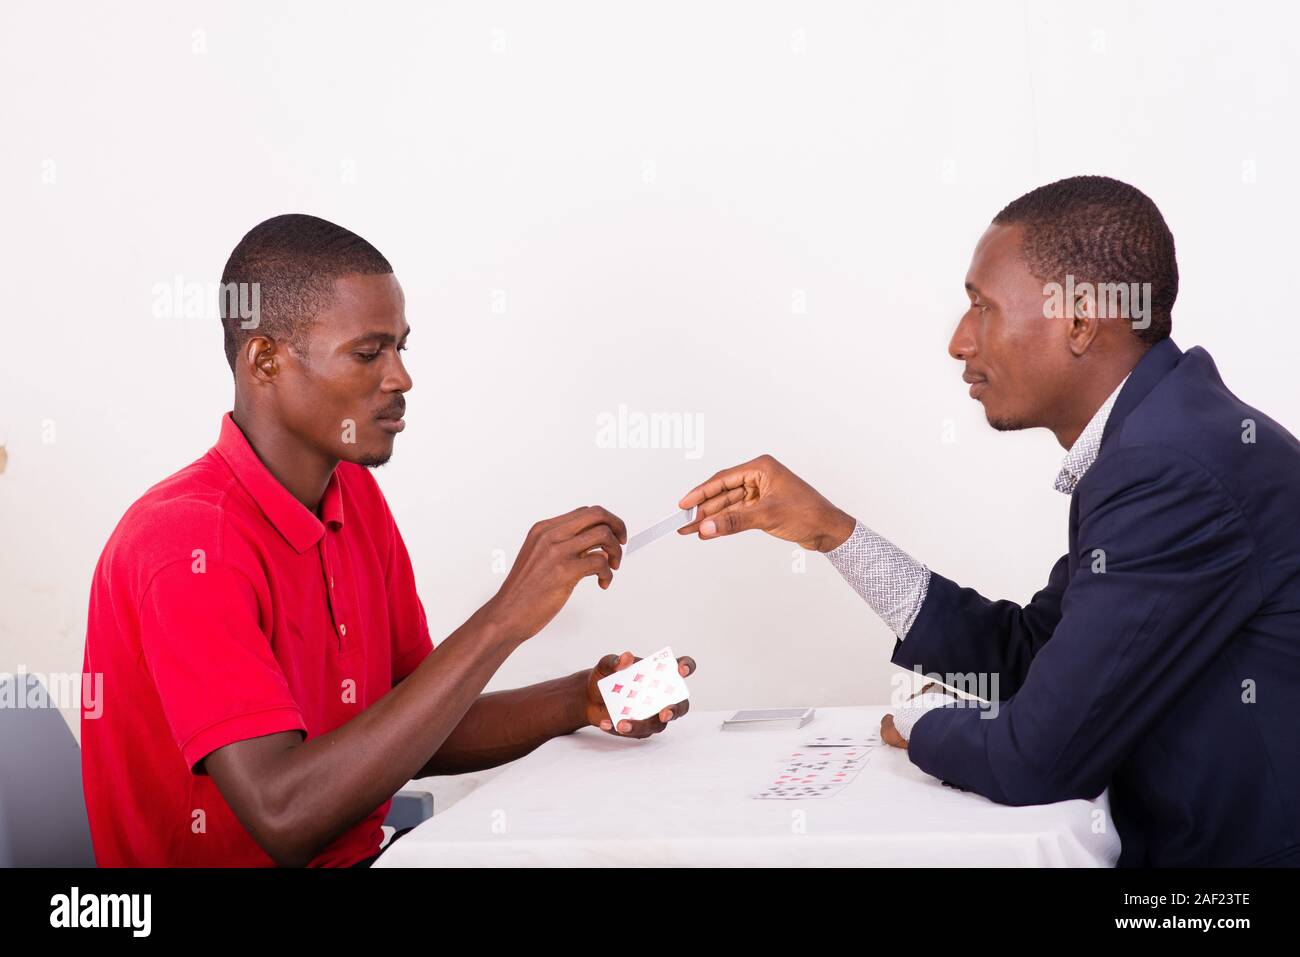 poker game between two men around a table sitting around a table with cards distributed Stock Photo